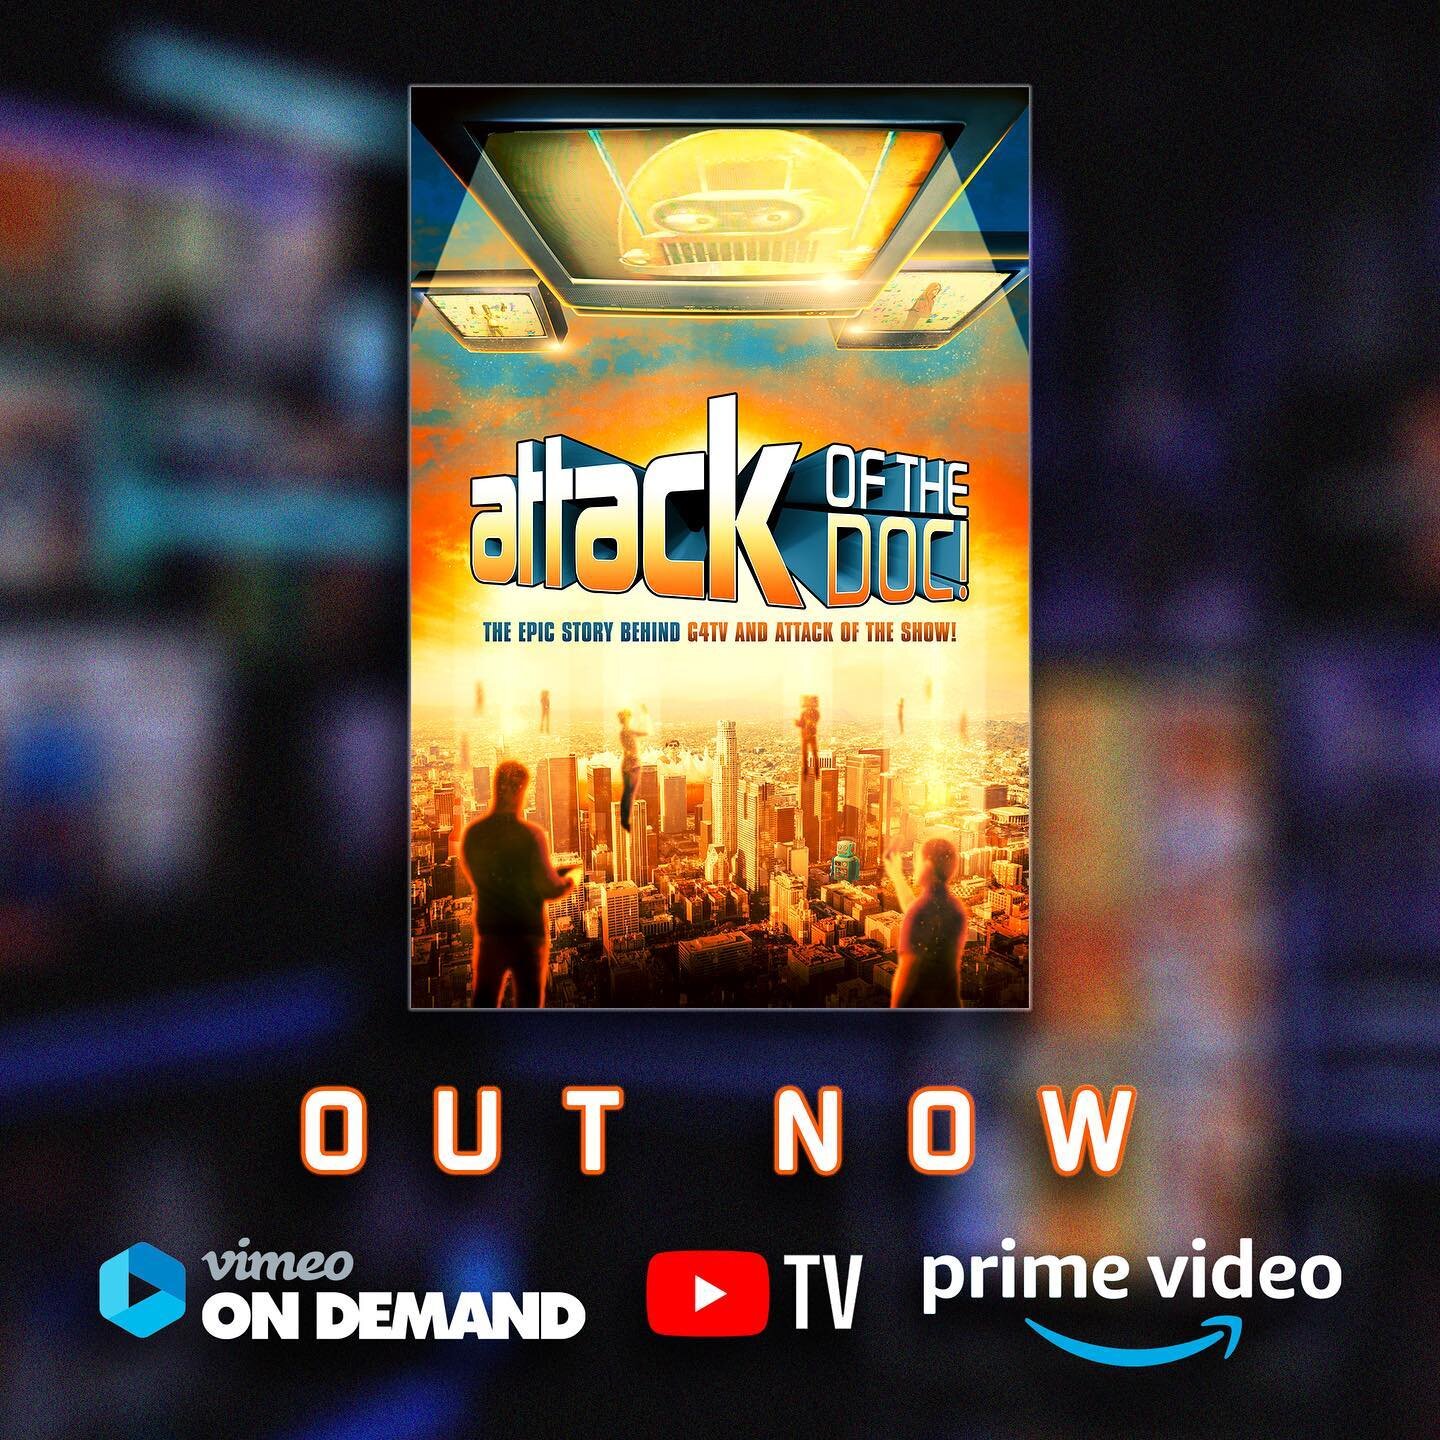 #AttackOfTheDoc is out today on VOD! 📺

Before the rise of big tech, social media and Marvel movies, Attack of the Show! chronicled nerd culture&rsquo;s unlikely acceptance into the mainstream. G4TV&rsquo;s flagship show launched the careers of host